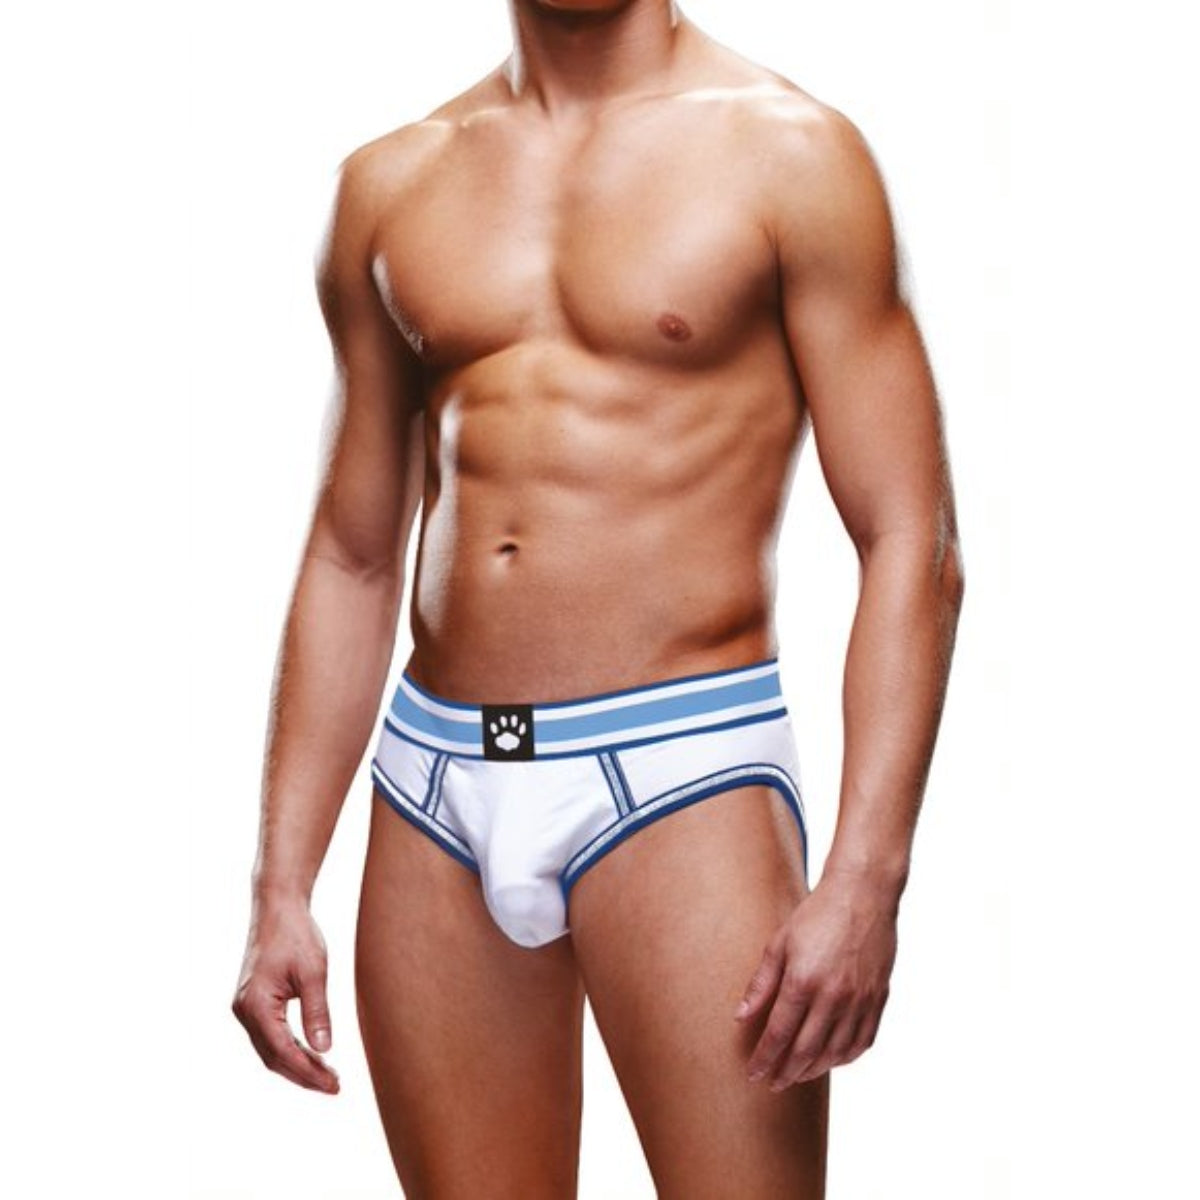 Prowler Backless Brief Blue White